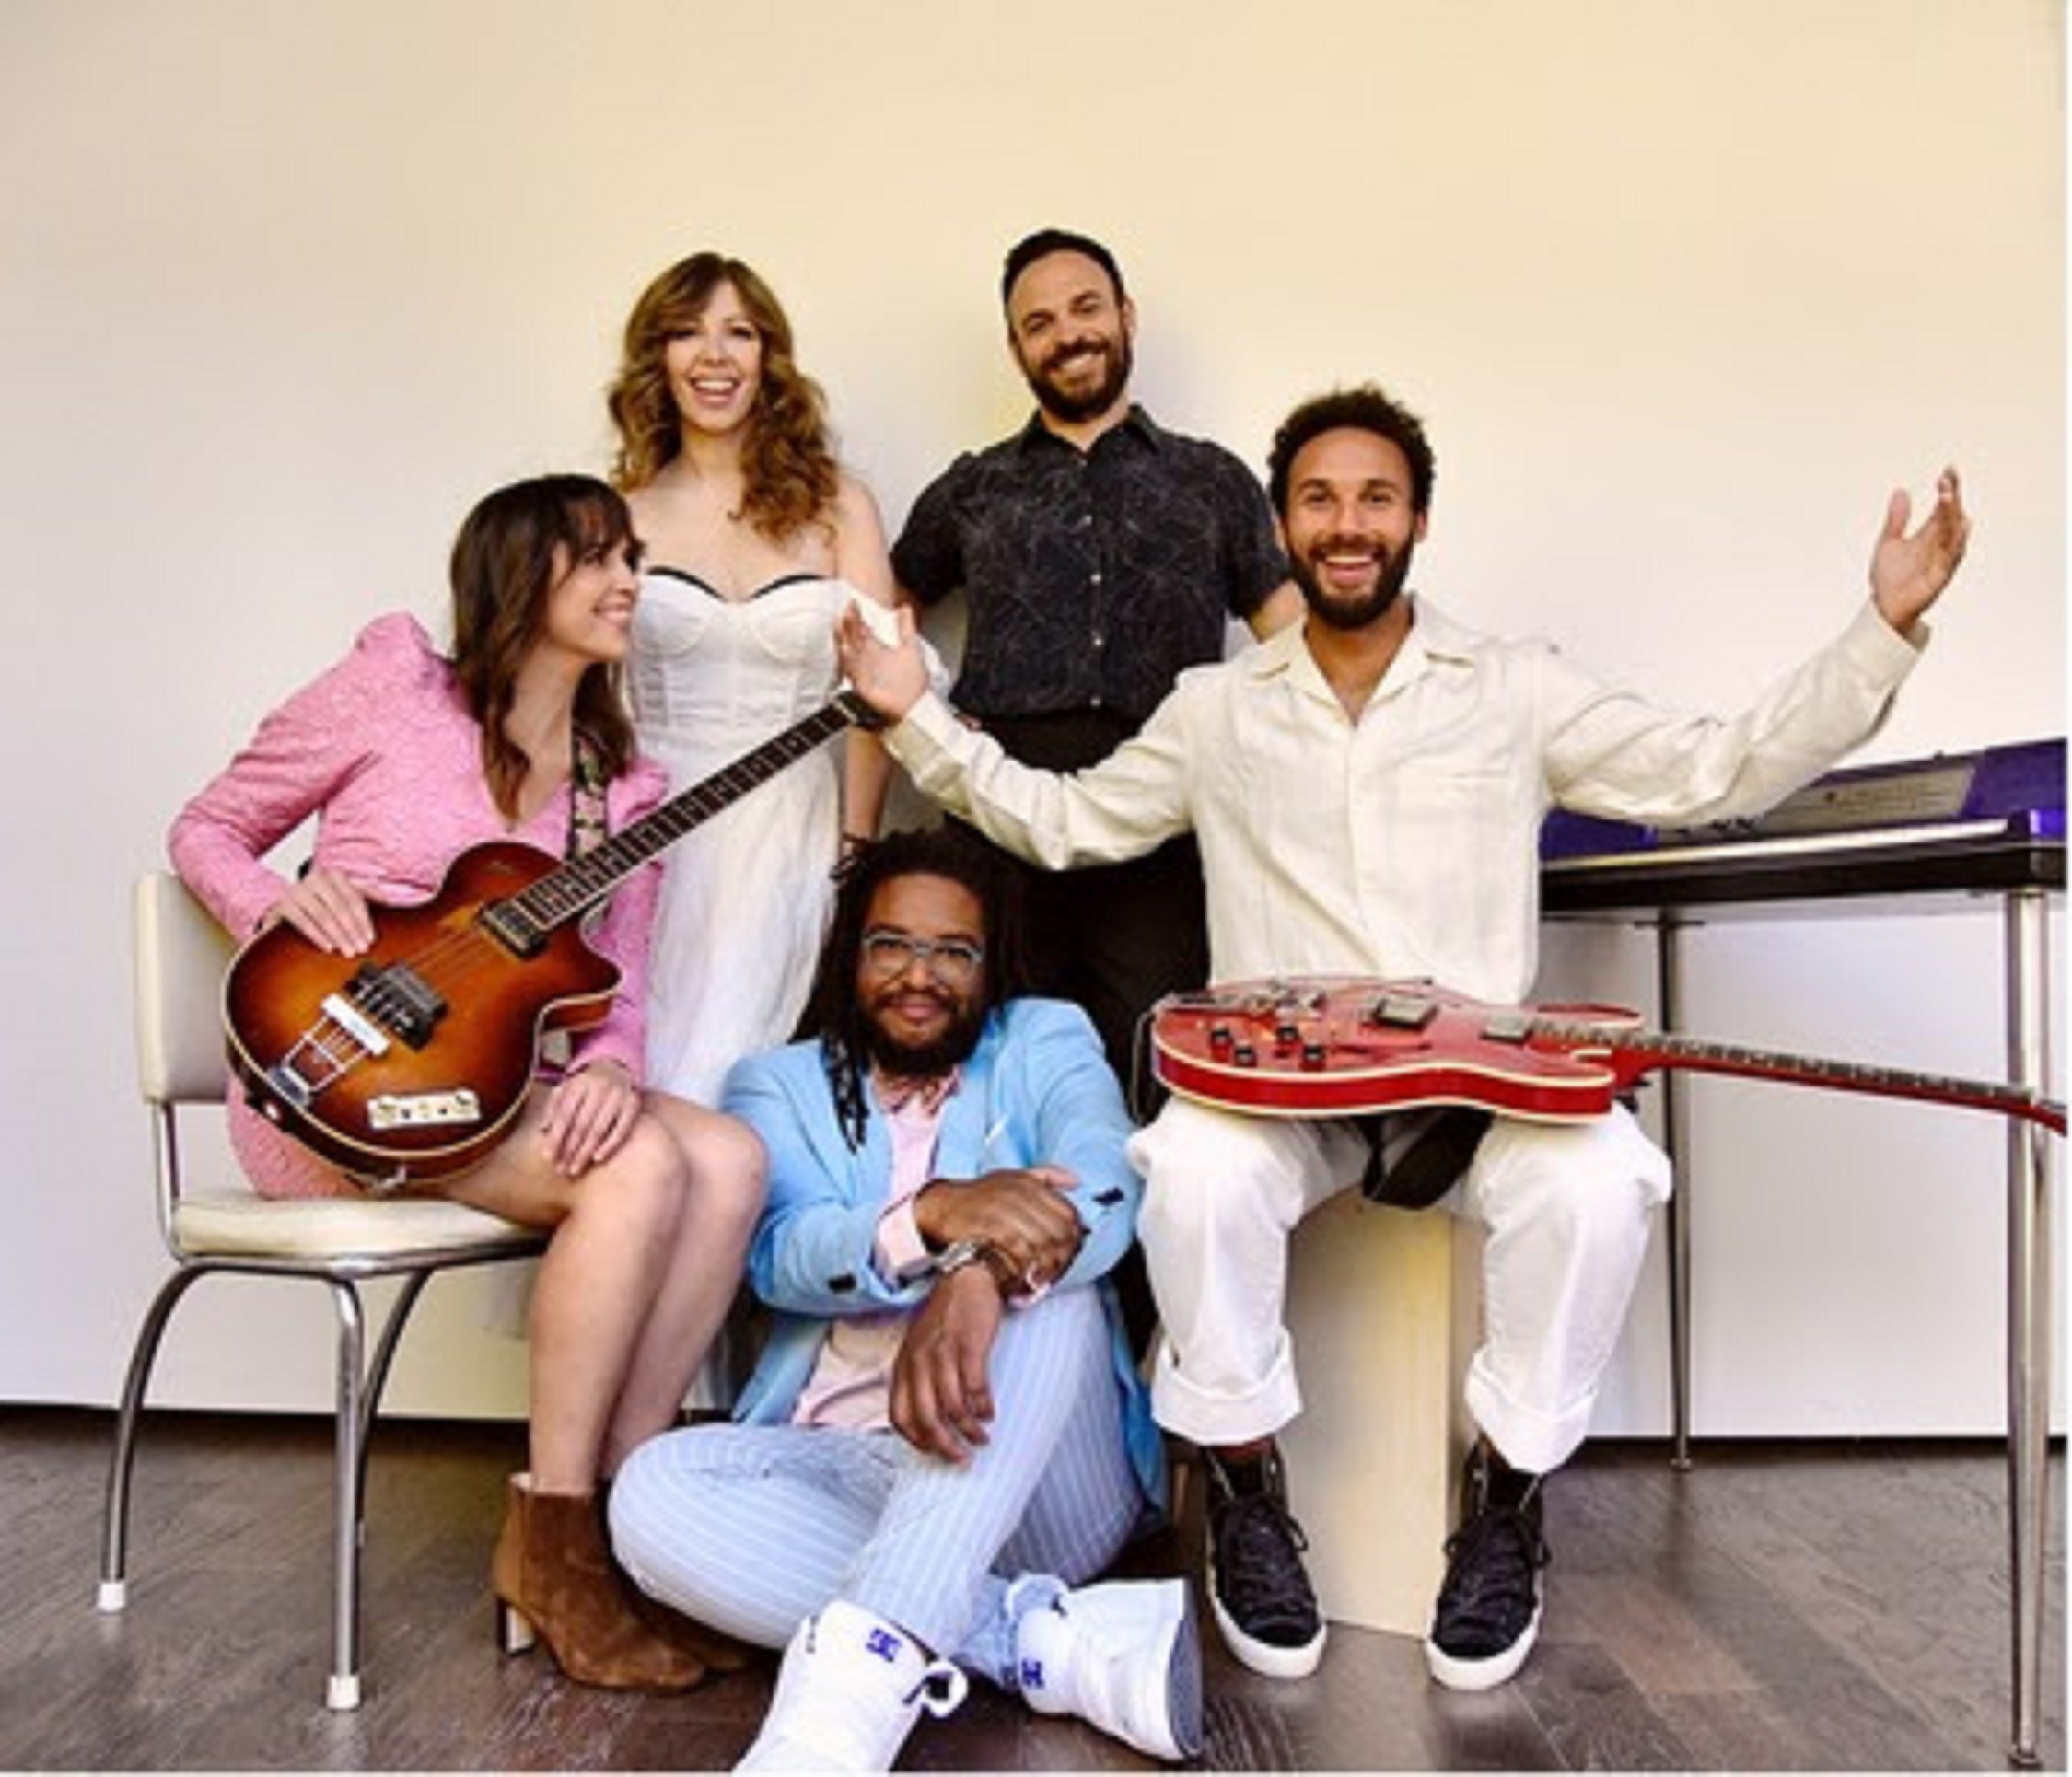 Lake Street Dive Unveil New Song "Better Not Tell You," full LP Good Together out June 21 via Fantasy Records